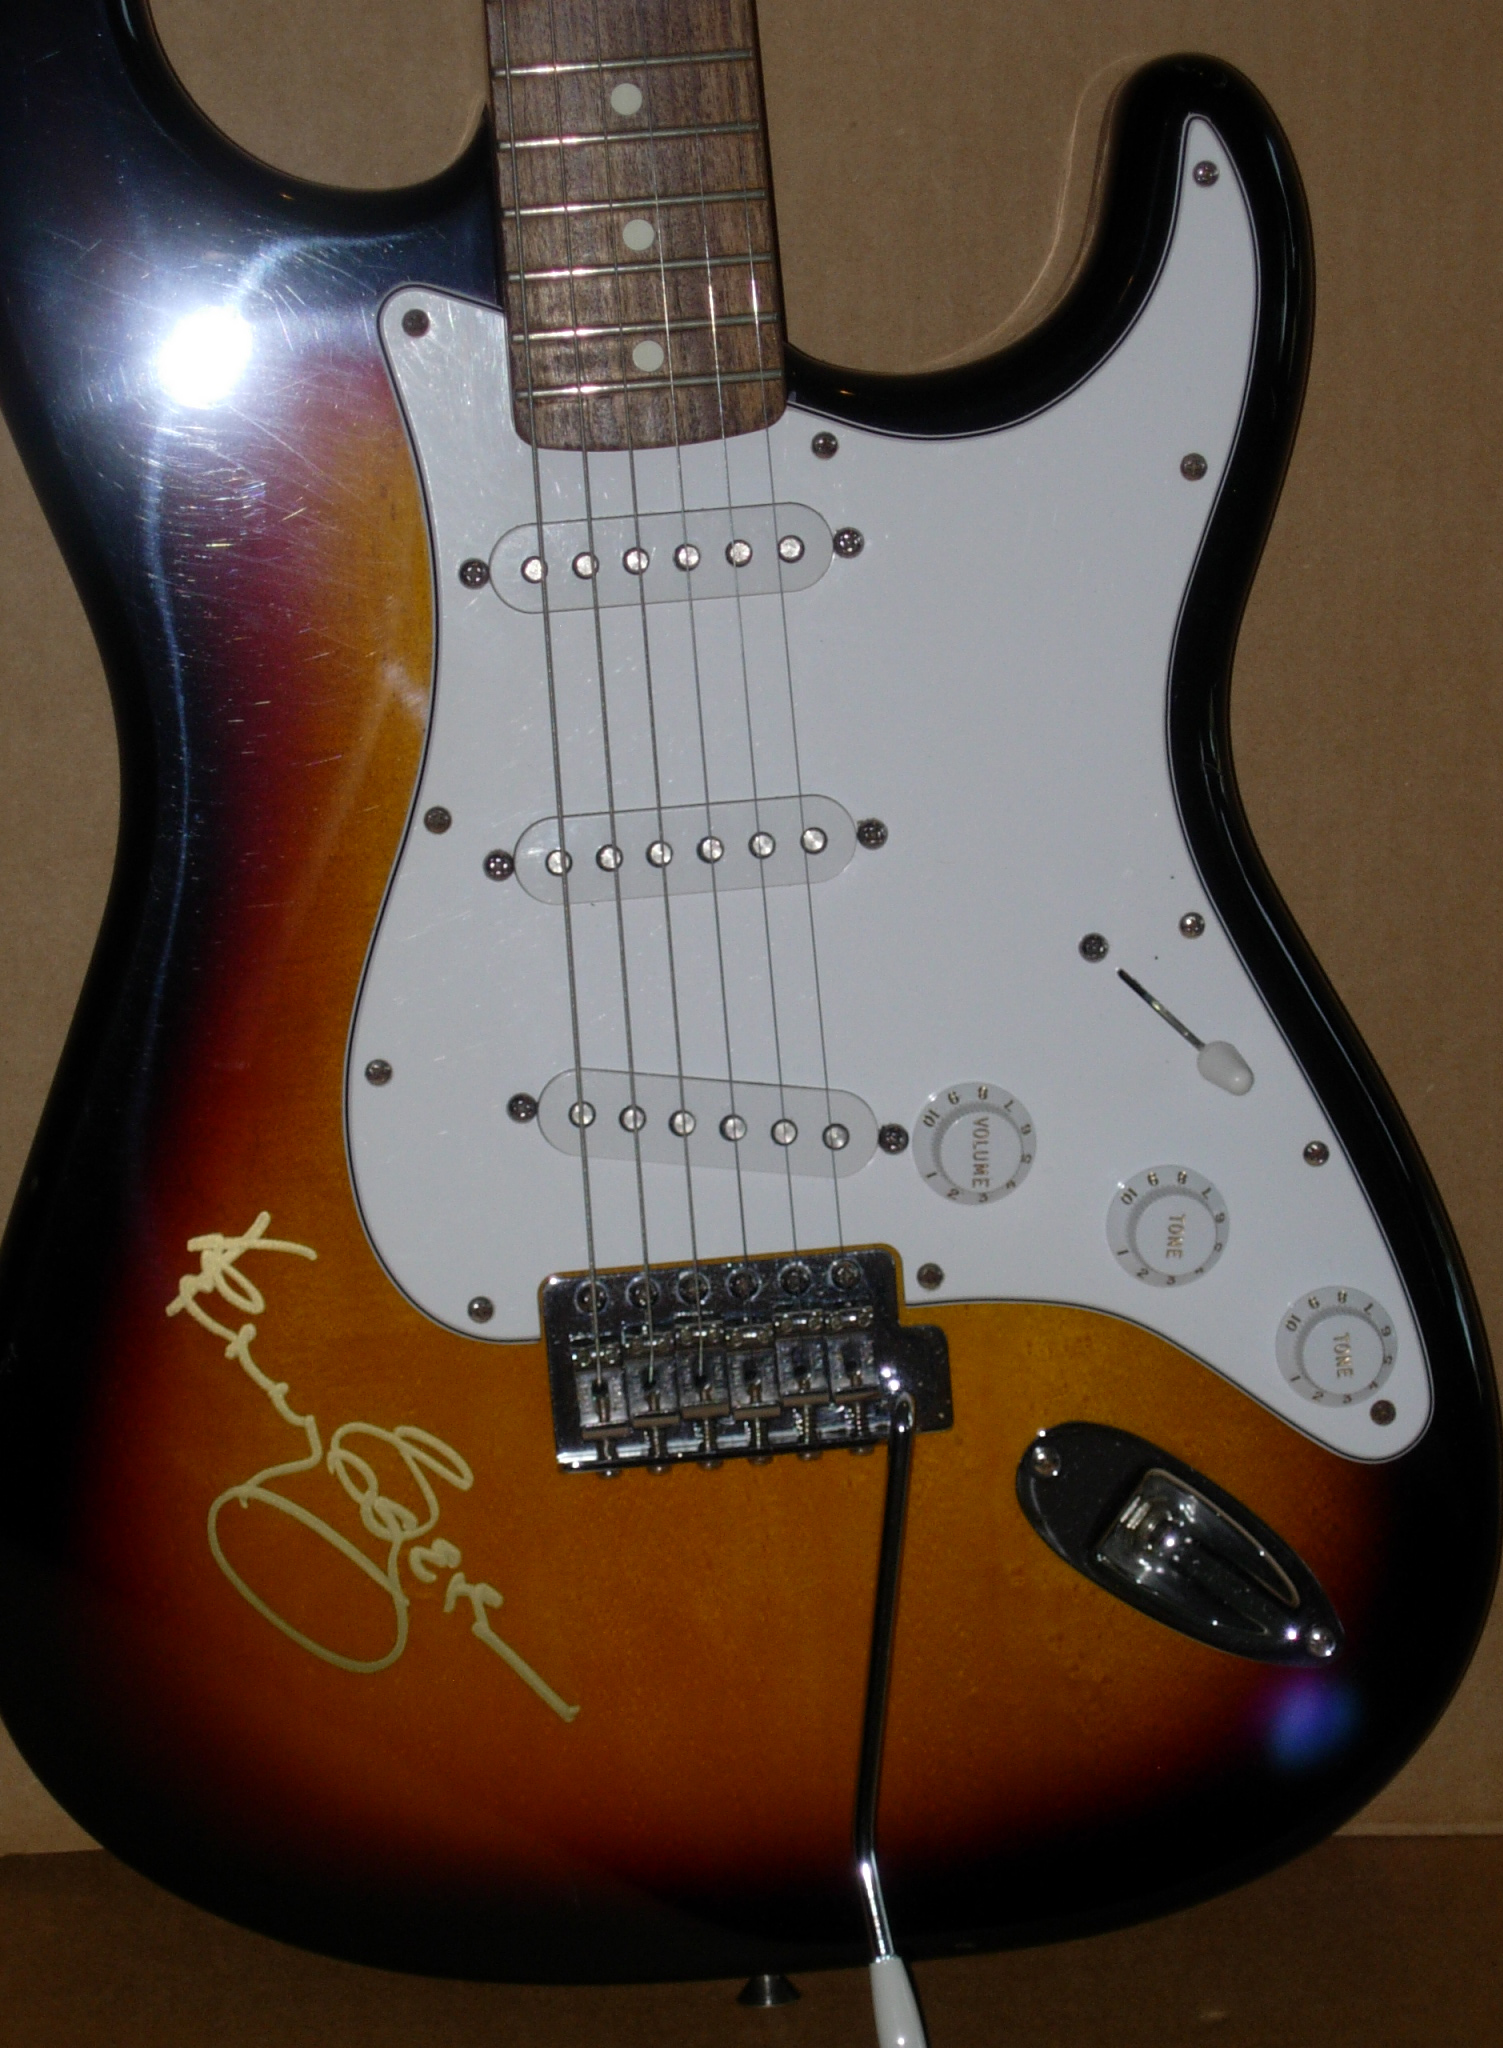 Kenny Rogers Autographed Guitar